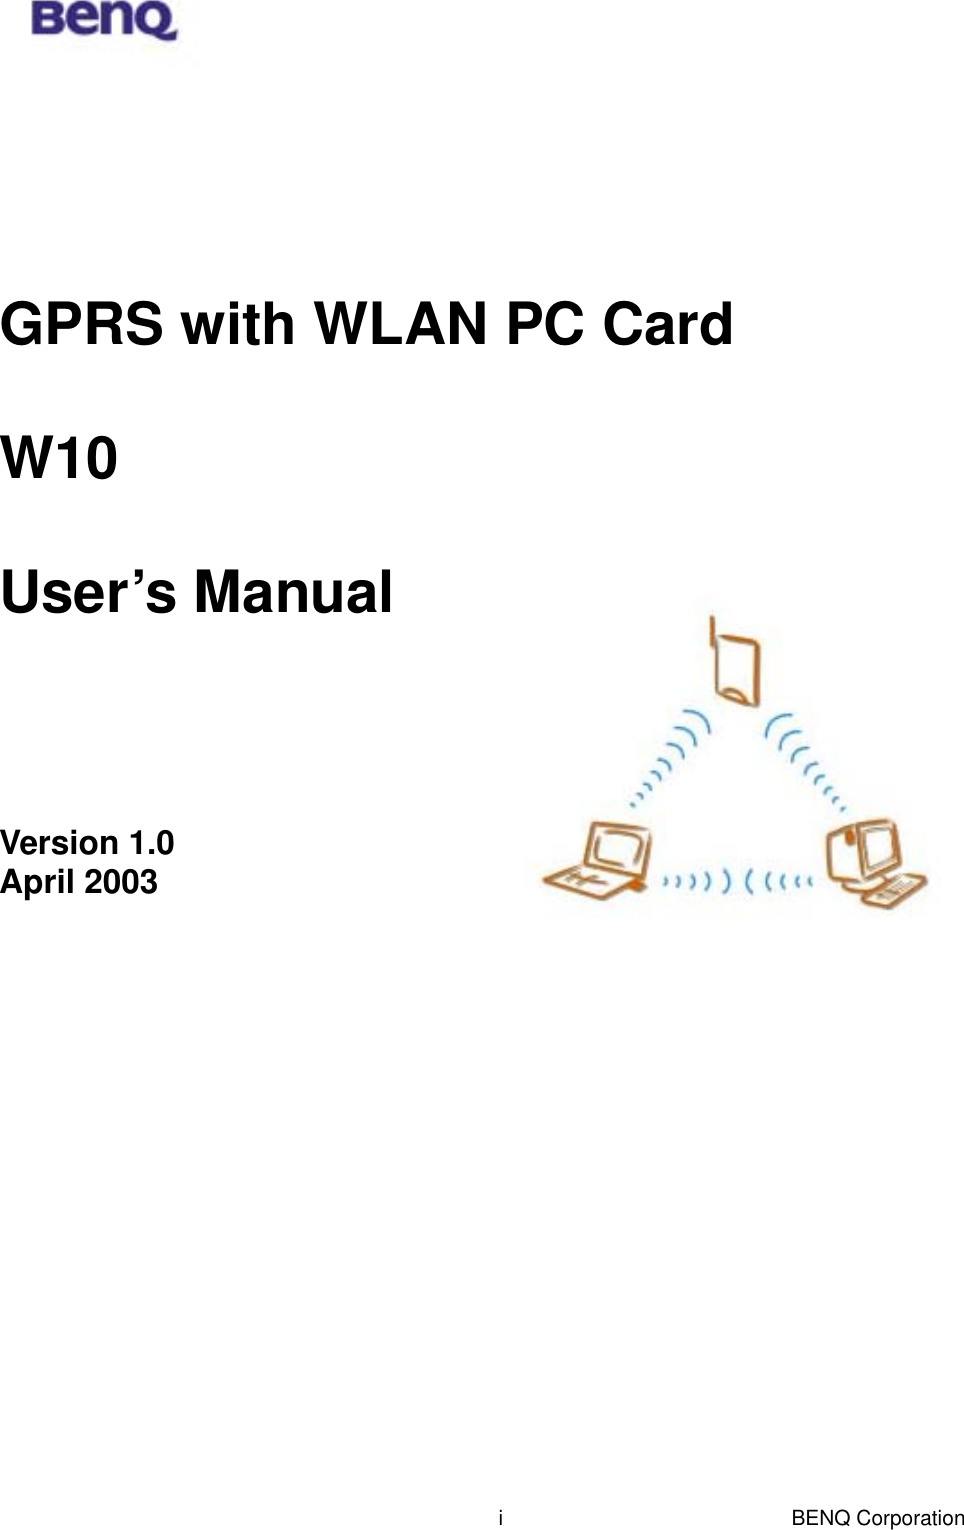  BENQ Corporation i      GPRS with WLAN PC Card  W10 User’s Manual  Version 1.0   April 2003 